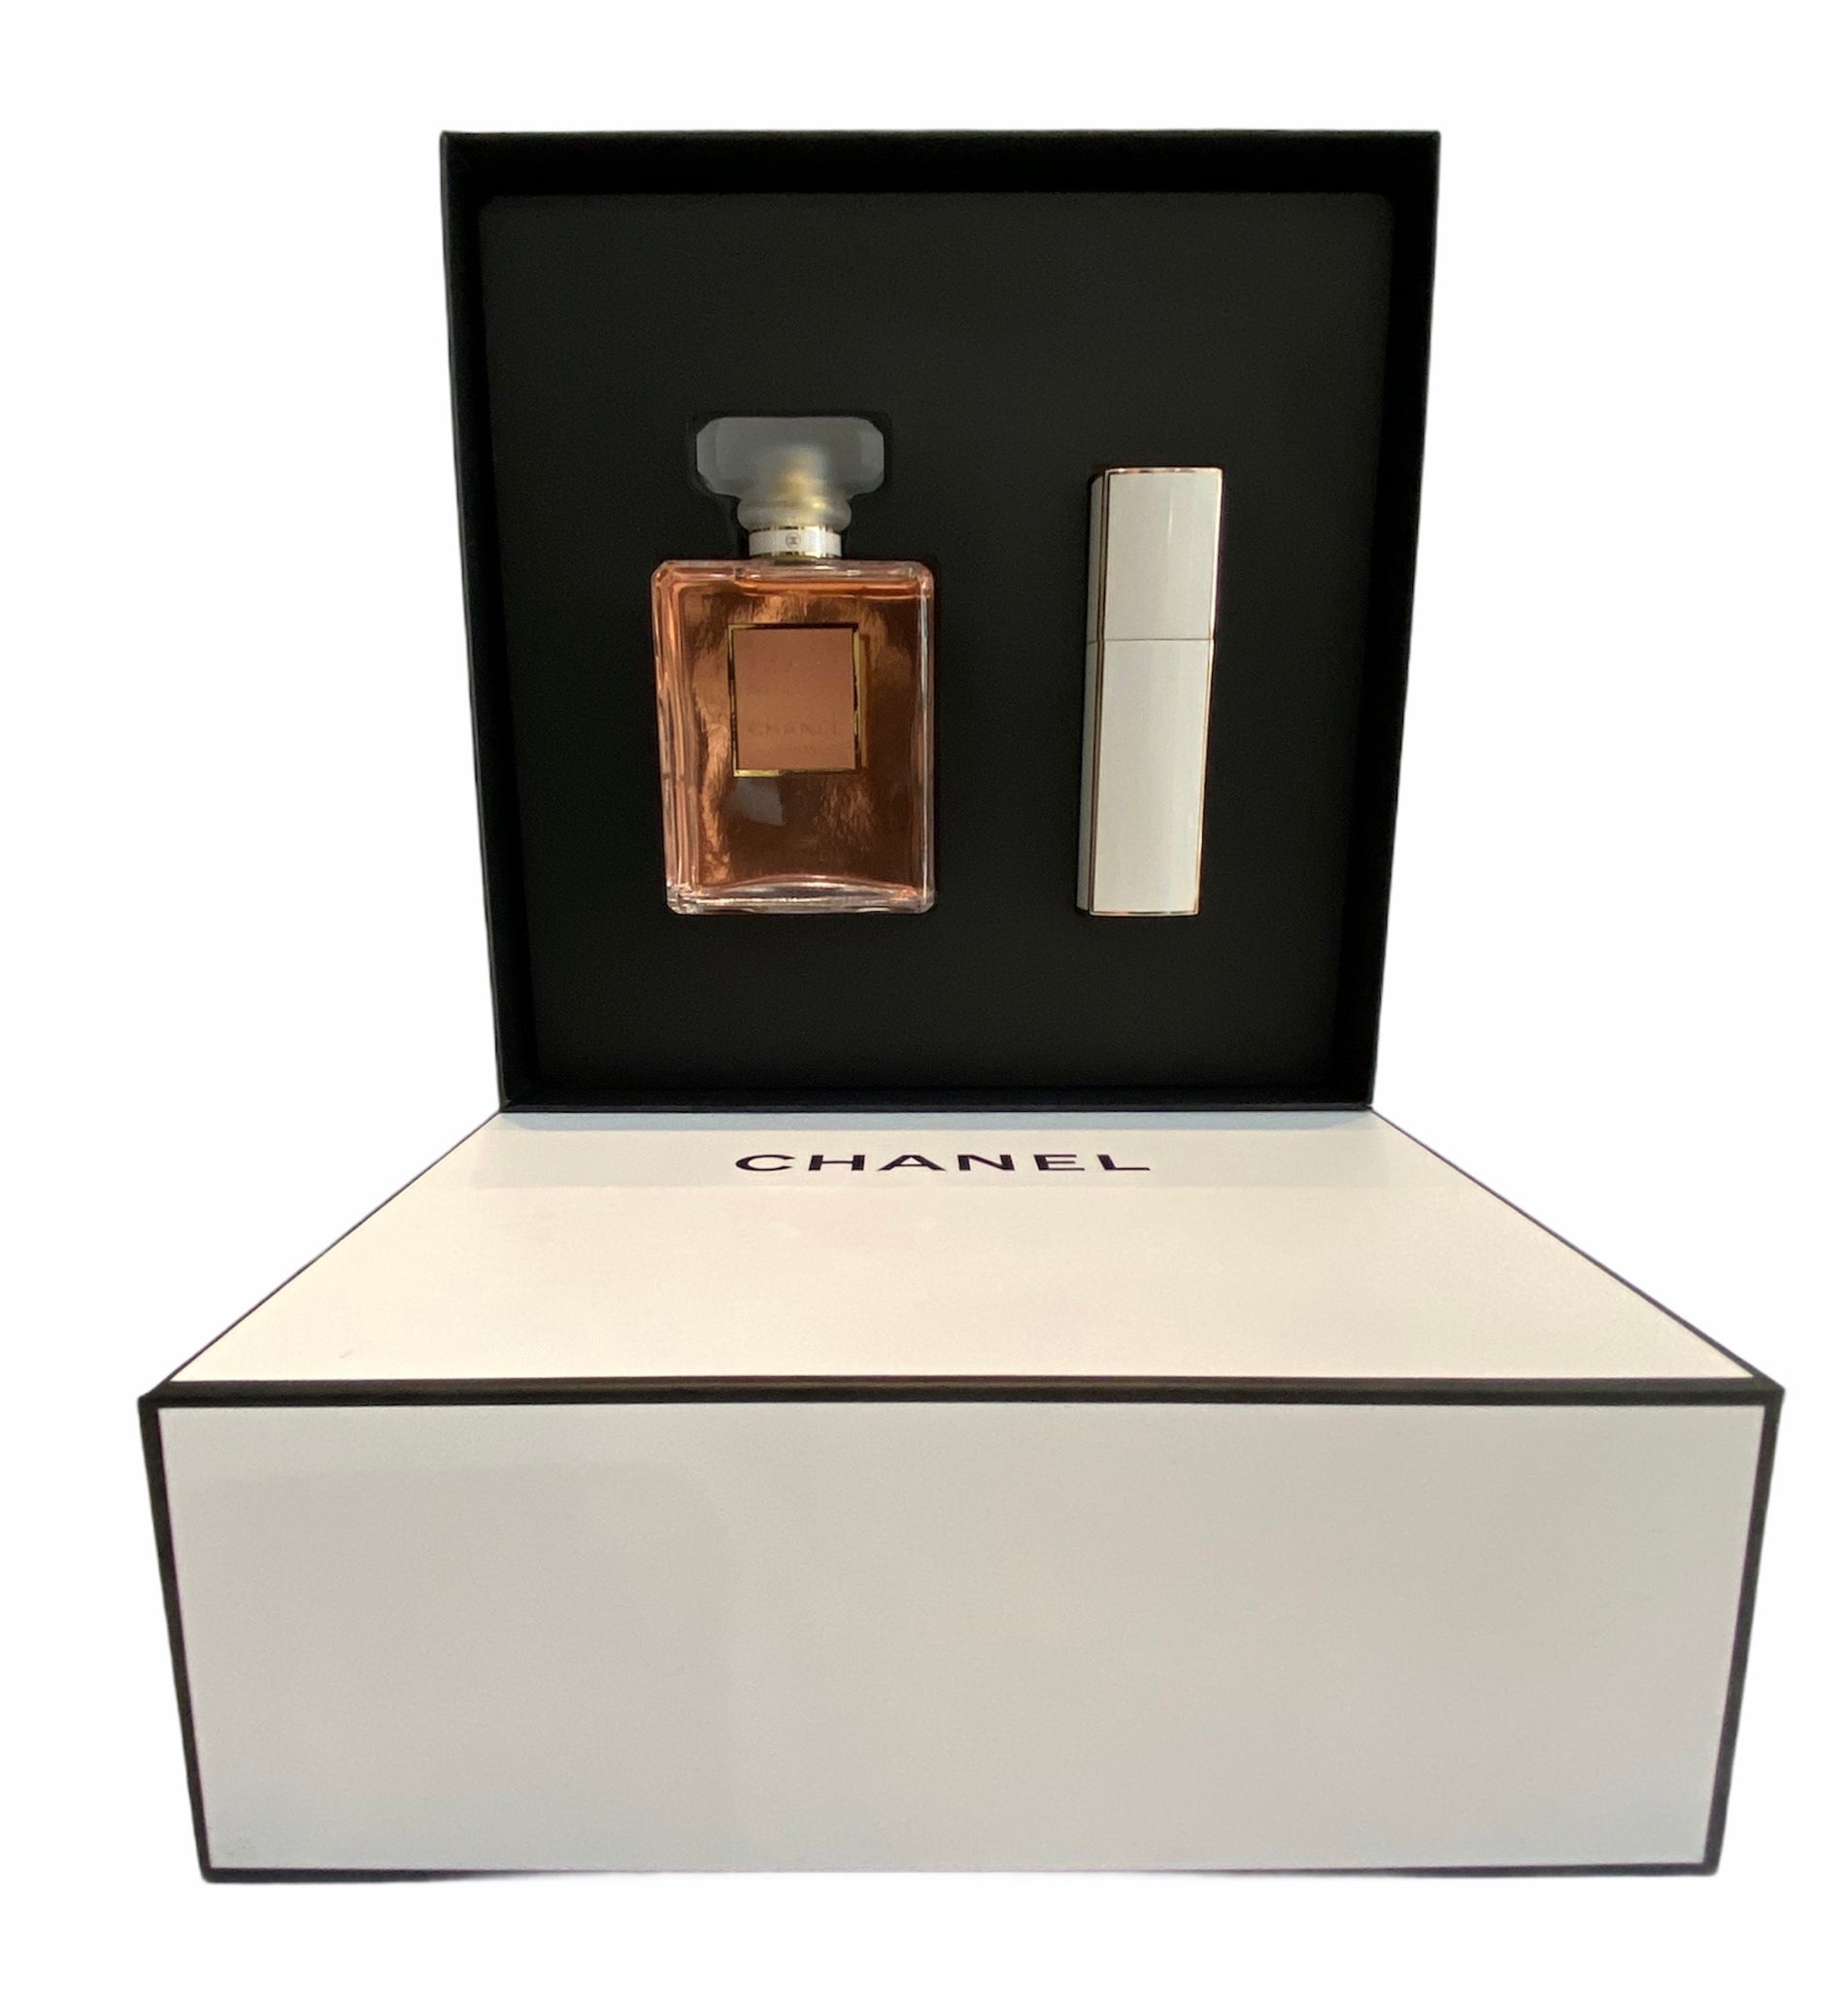 Coco Mademoiselle by Chanel gift set has a rich history of class and makes  the perfect holiday gift. With notes of orange, jasmine and rose…this gift  set, By Macy's Westmoreland